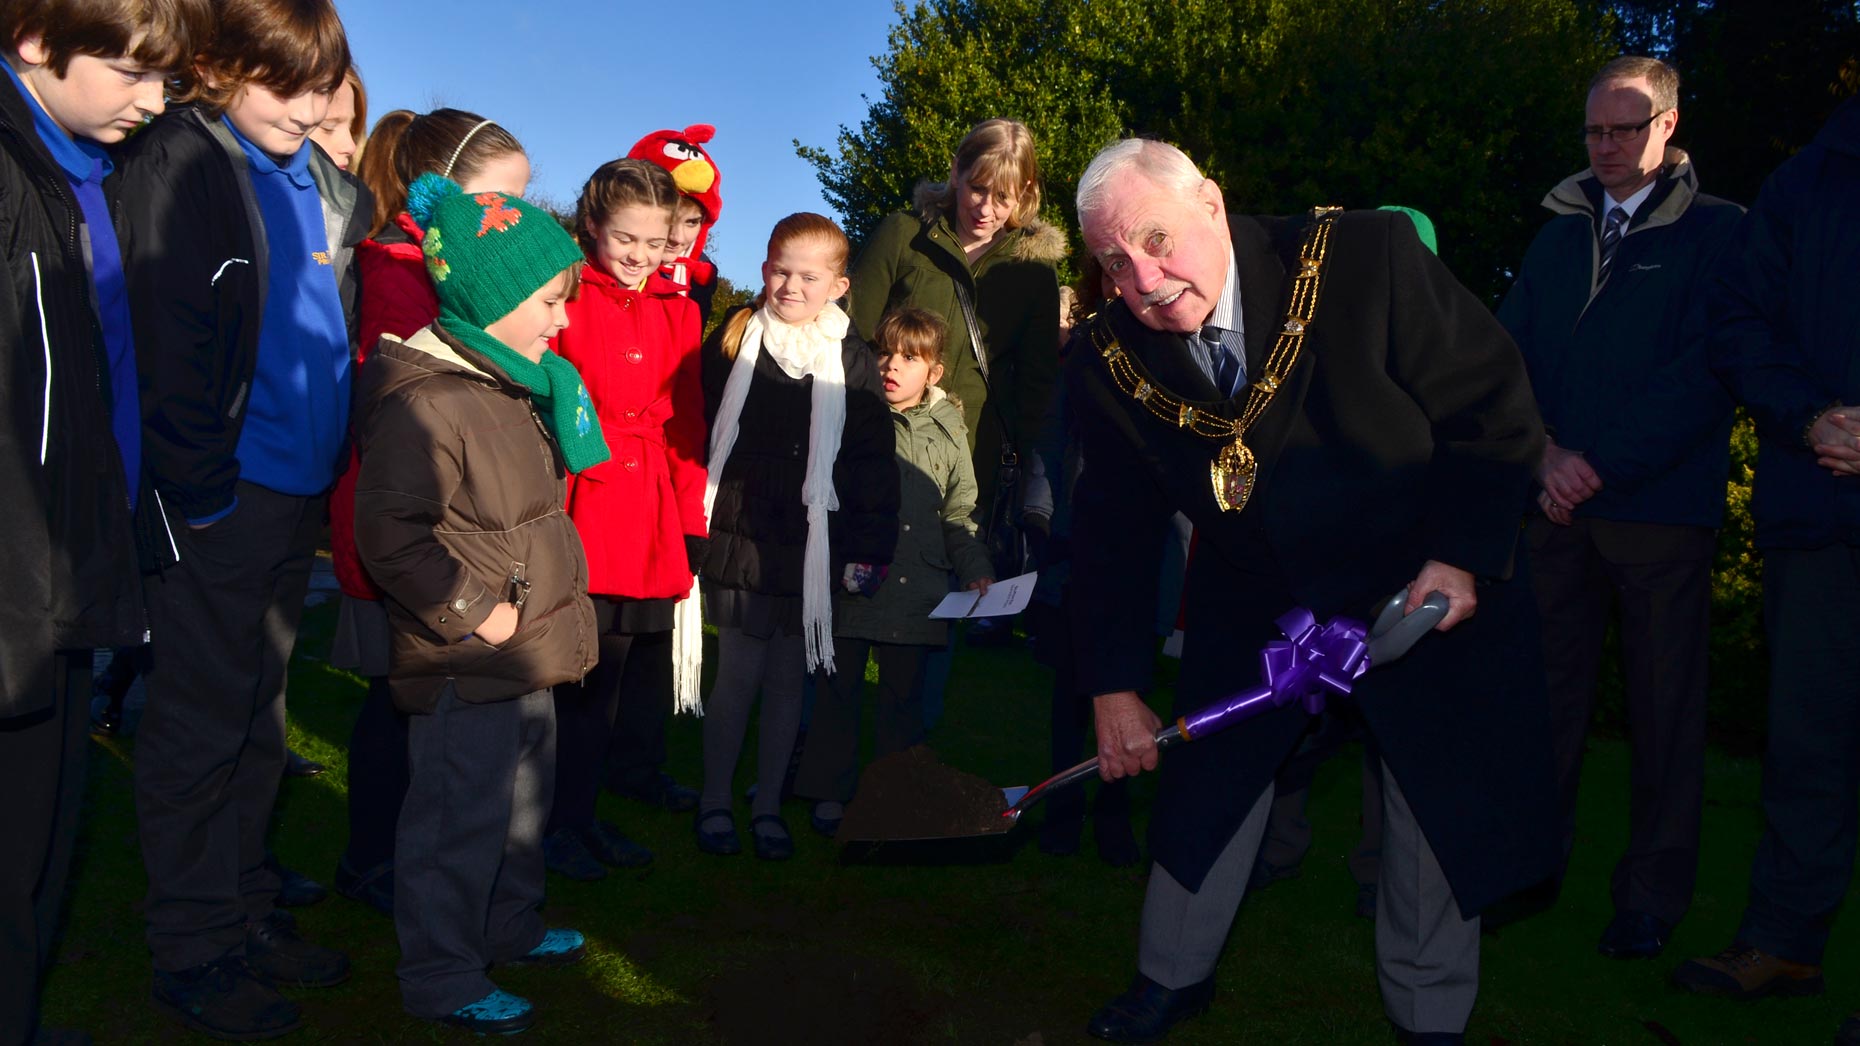 Mayor of Lincoln Patrick Vaughan helped bury the time capsule in Boultham Park to mark the start of the project in November 2013. Photo: Steve Smailes for The Lincolnite